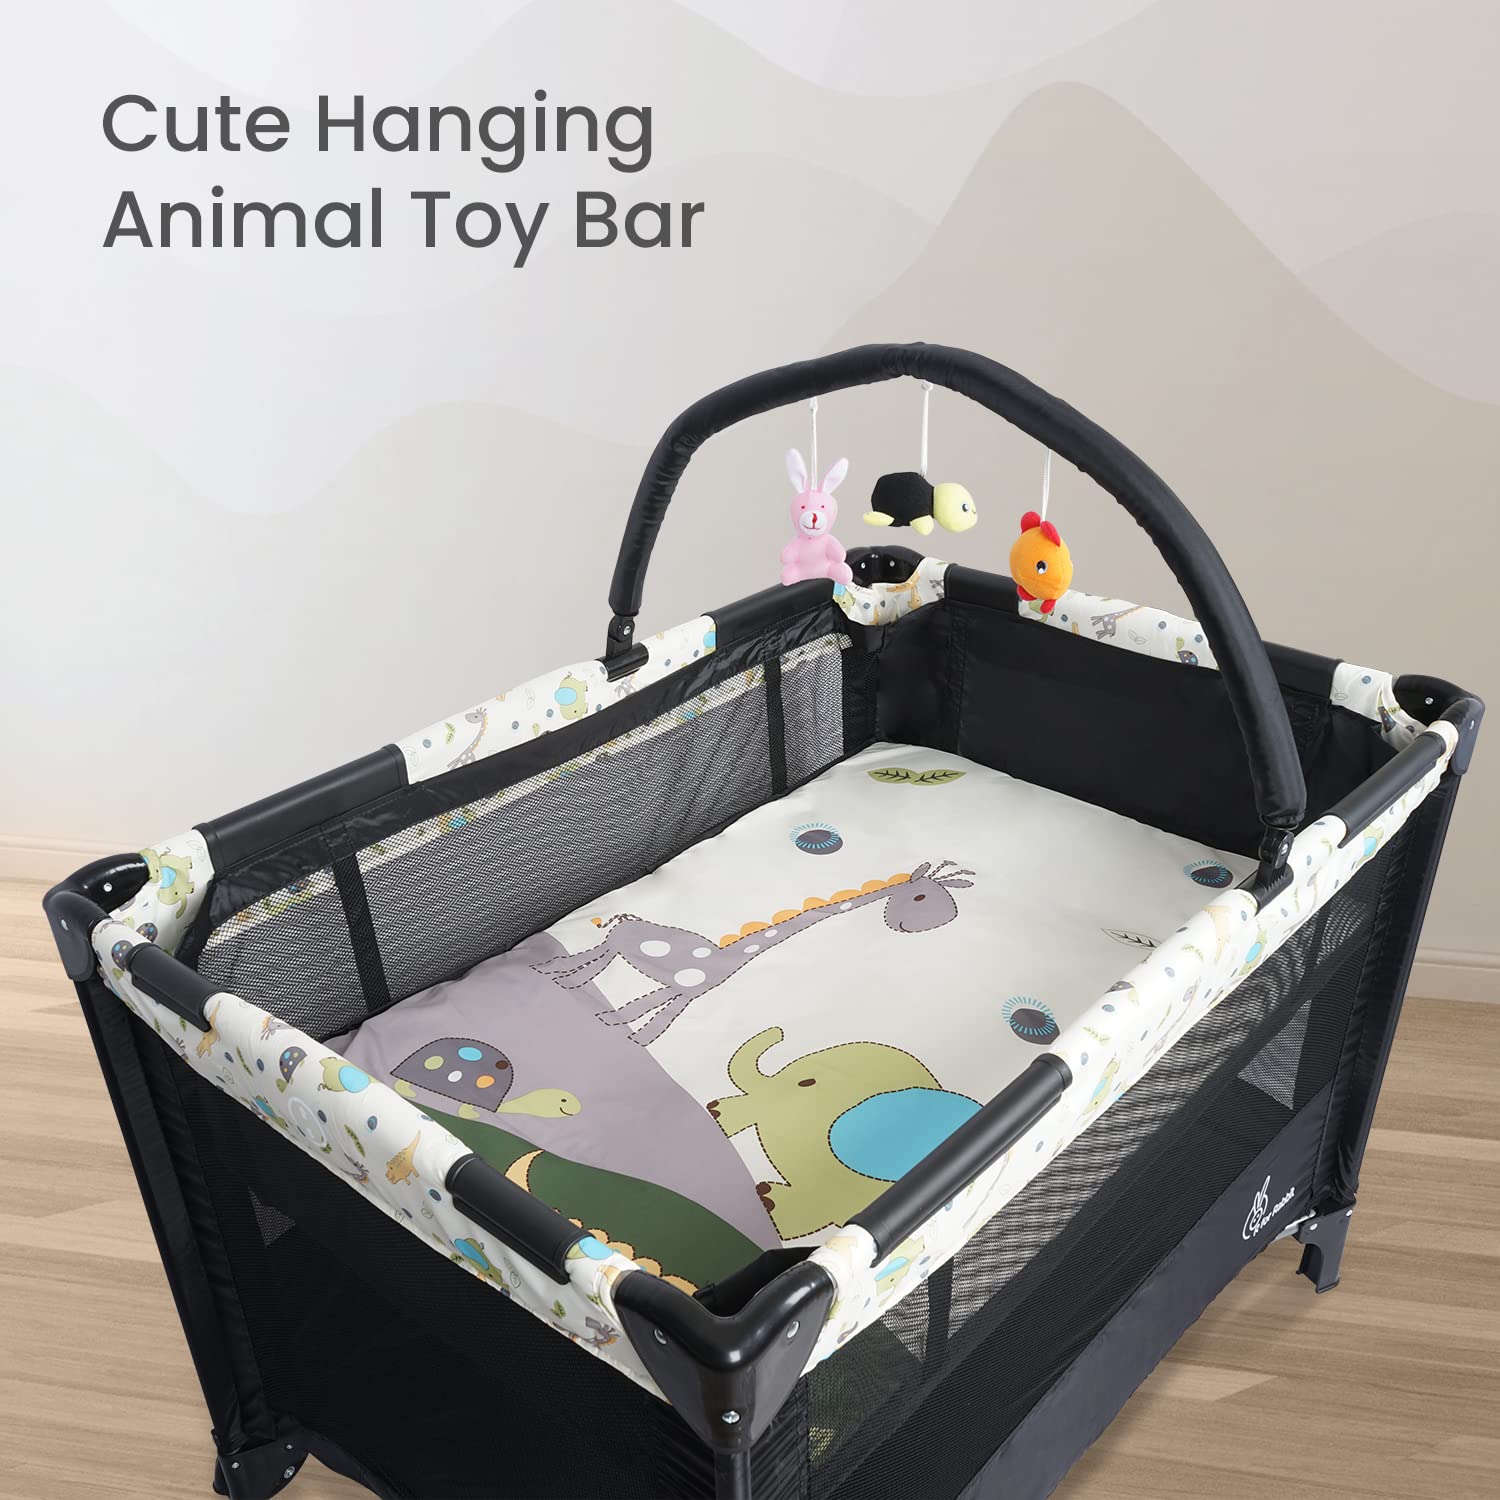 R FOR RABBIT Hide and Seek Elite Smart Folding Baby Bed Cot (Play Pen) for Kids of 0 to 3 years